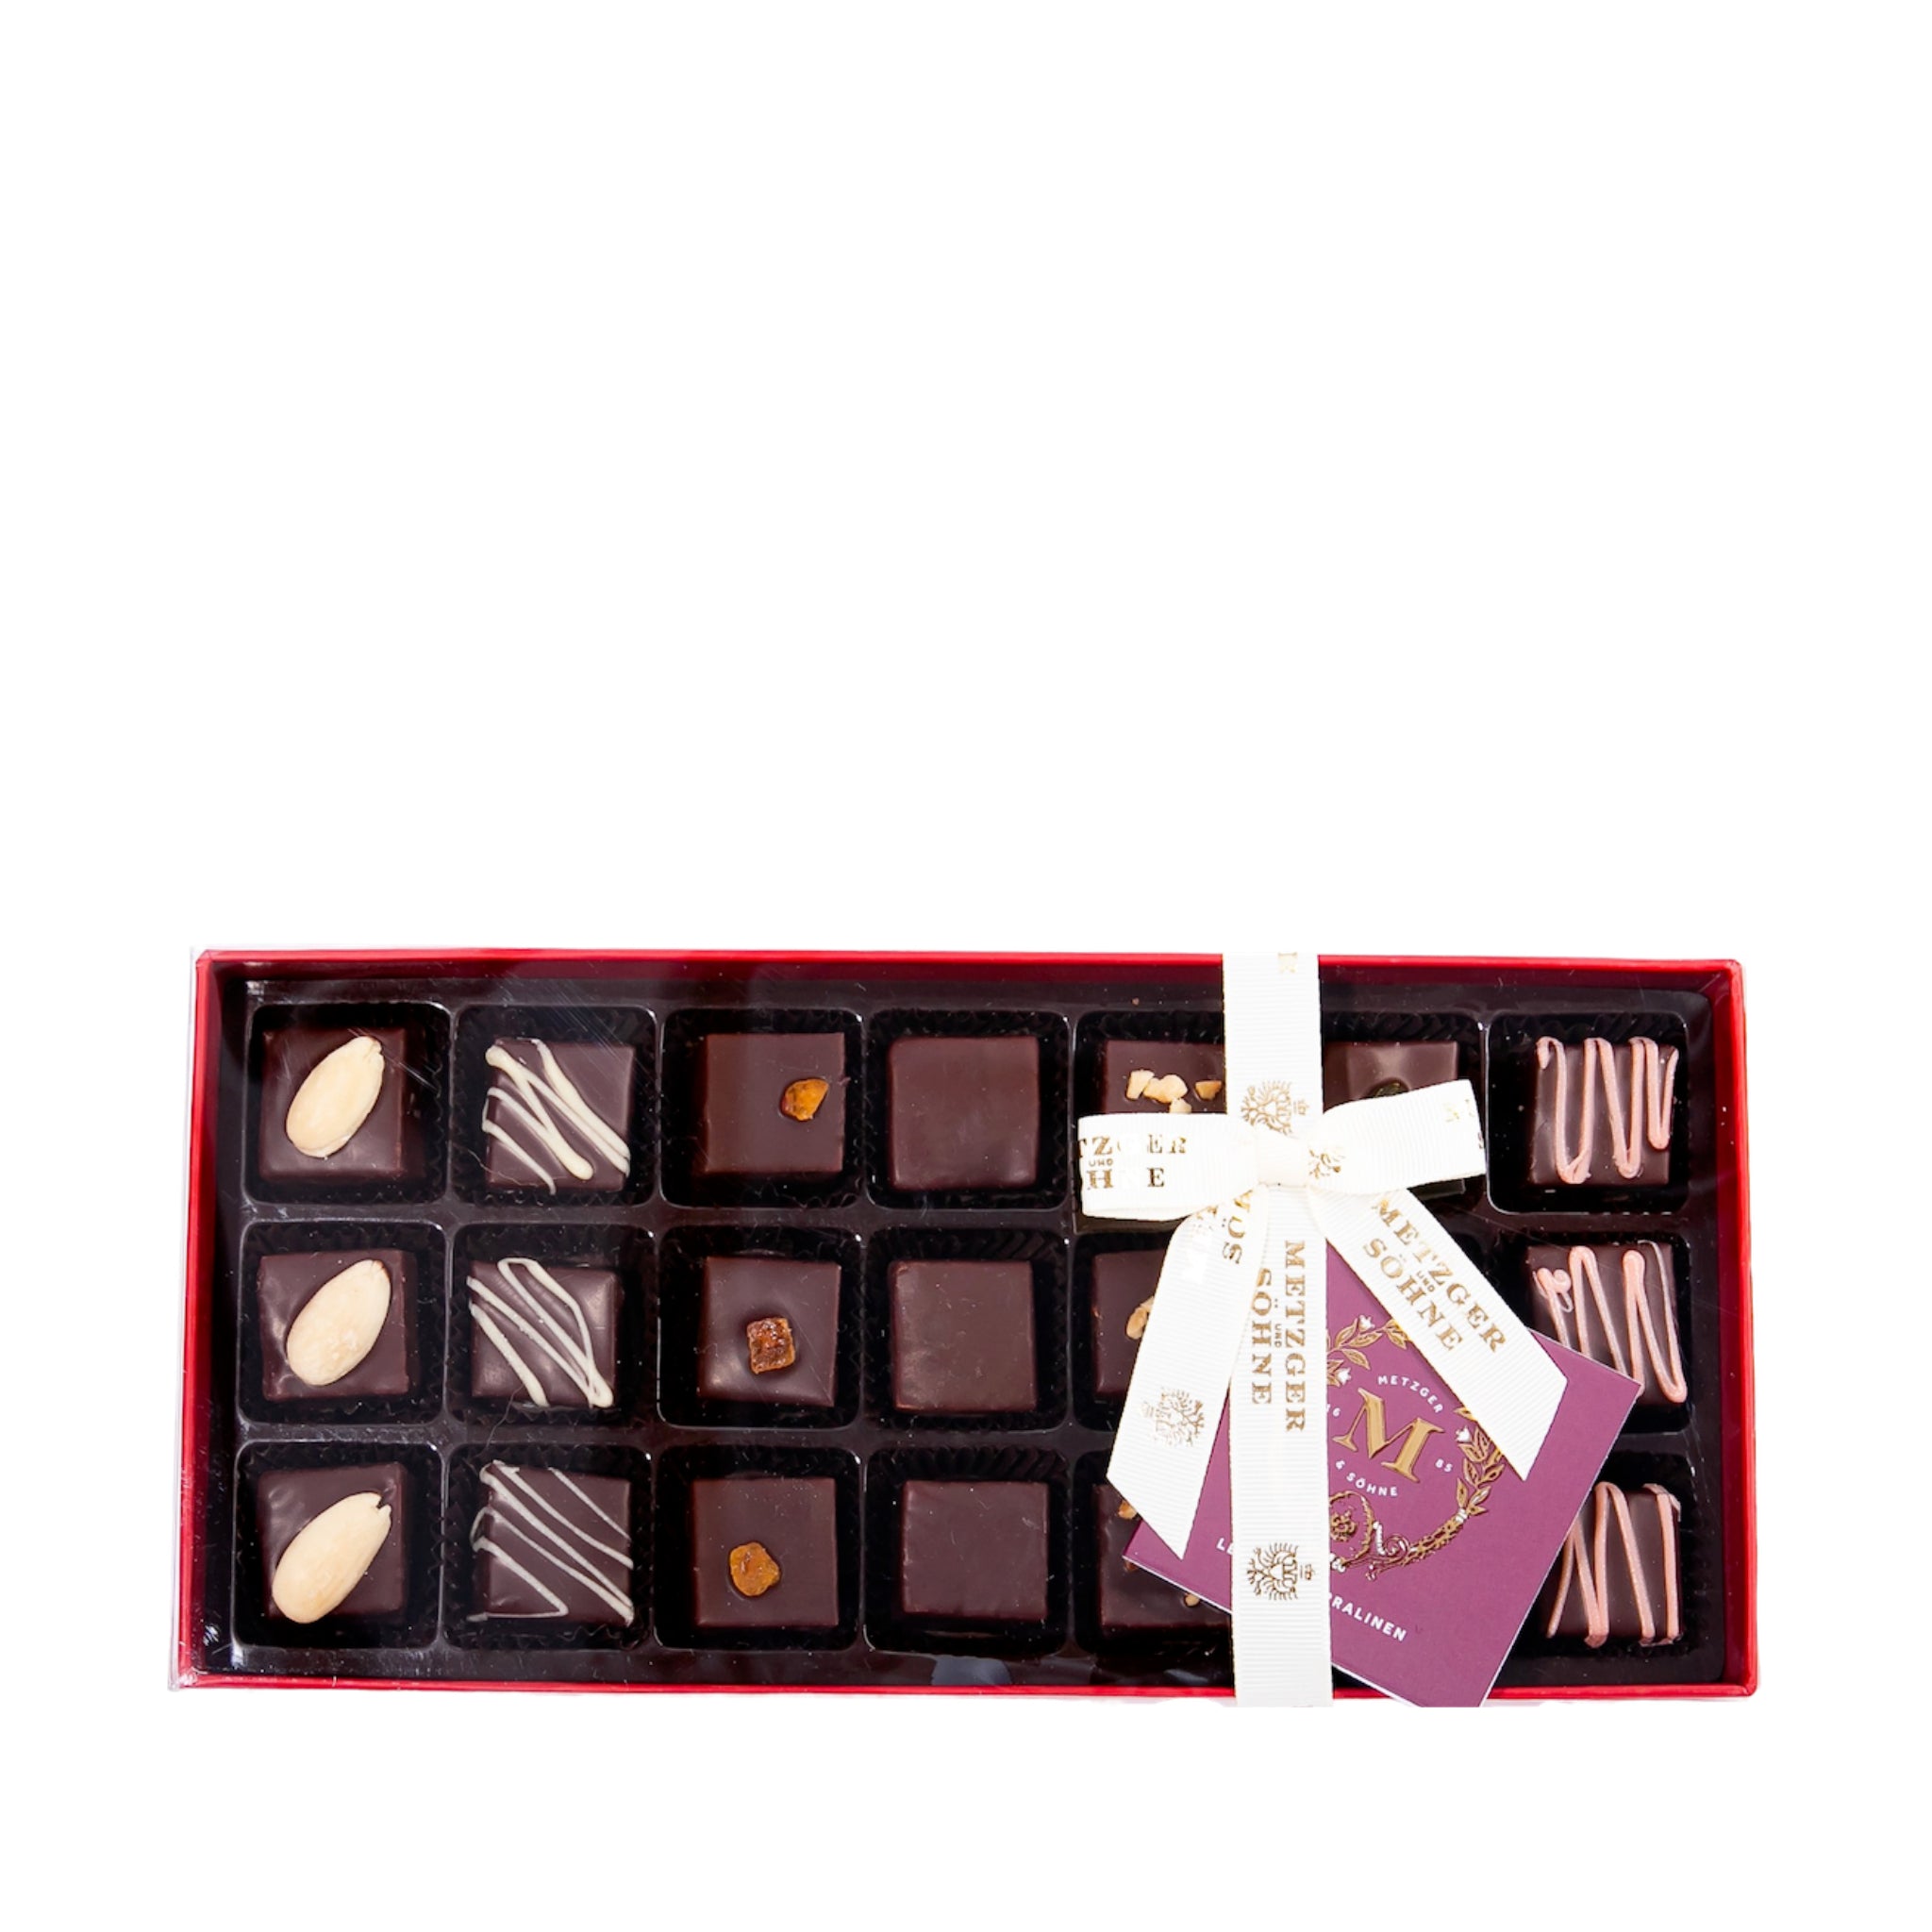 Lebkuchen Box of chocolates with clear lid, filled with 7 times 3 different gingerbread chocolates with a mesh.